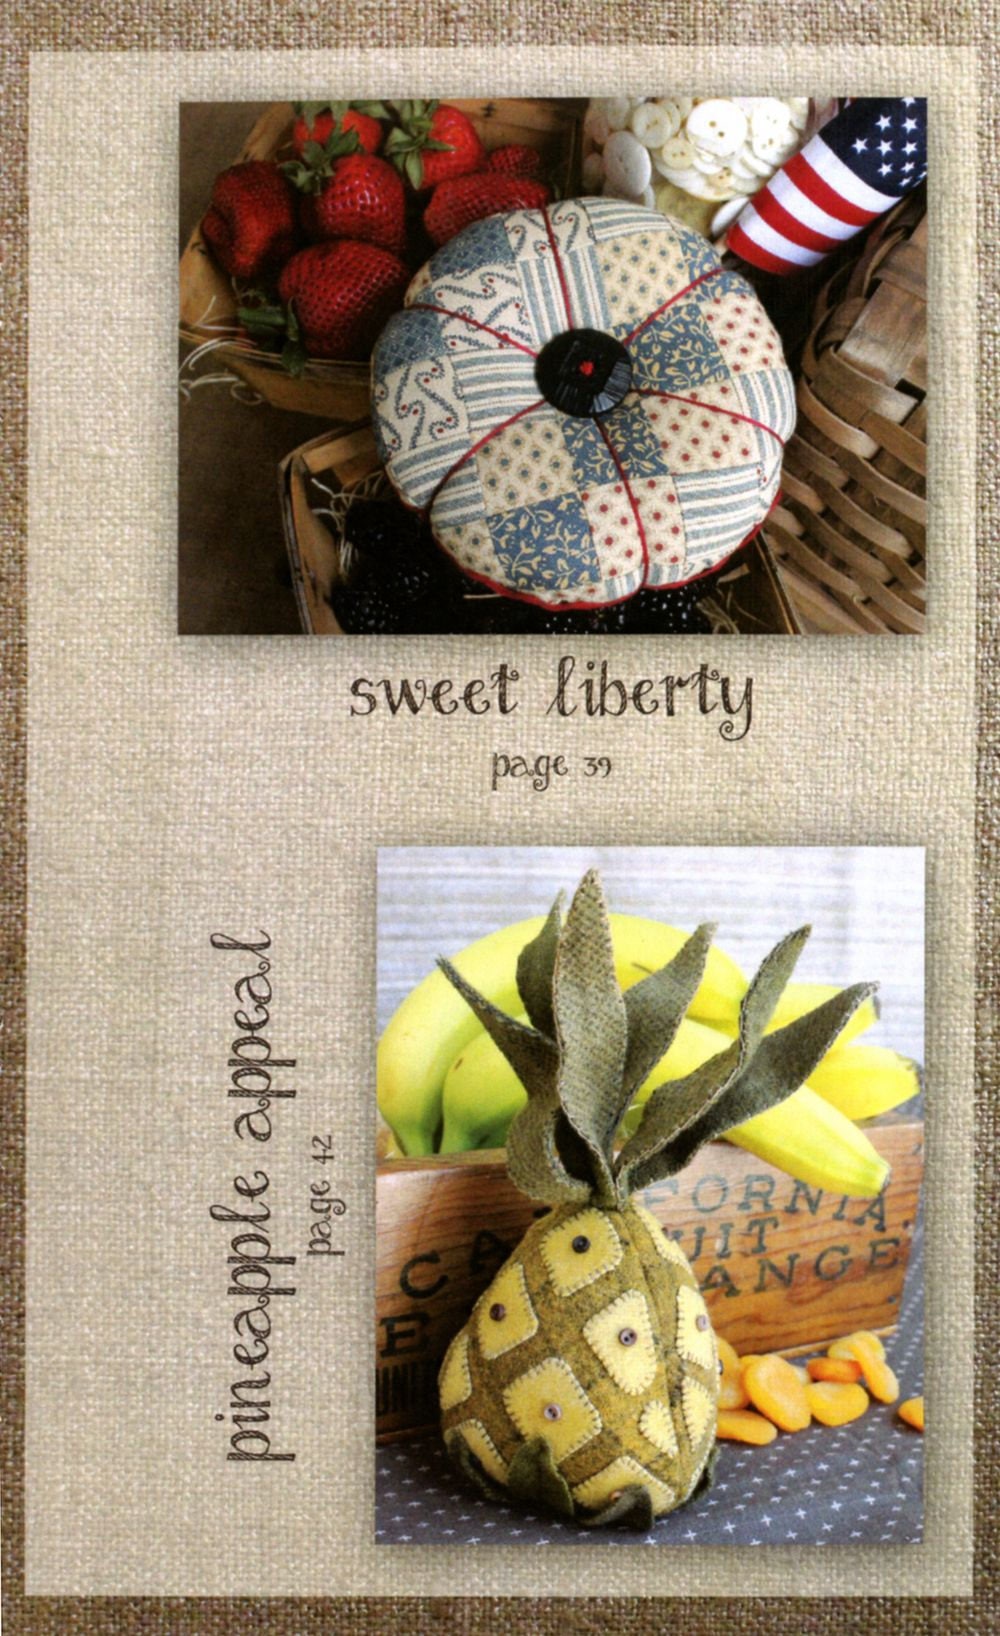 Cottage Keepsakes Pincushion and Needle Keeps Pattern Book by Kathy Cardif of Cottage at Cardiff Farms